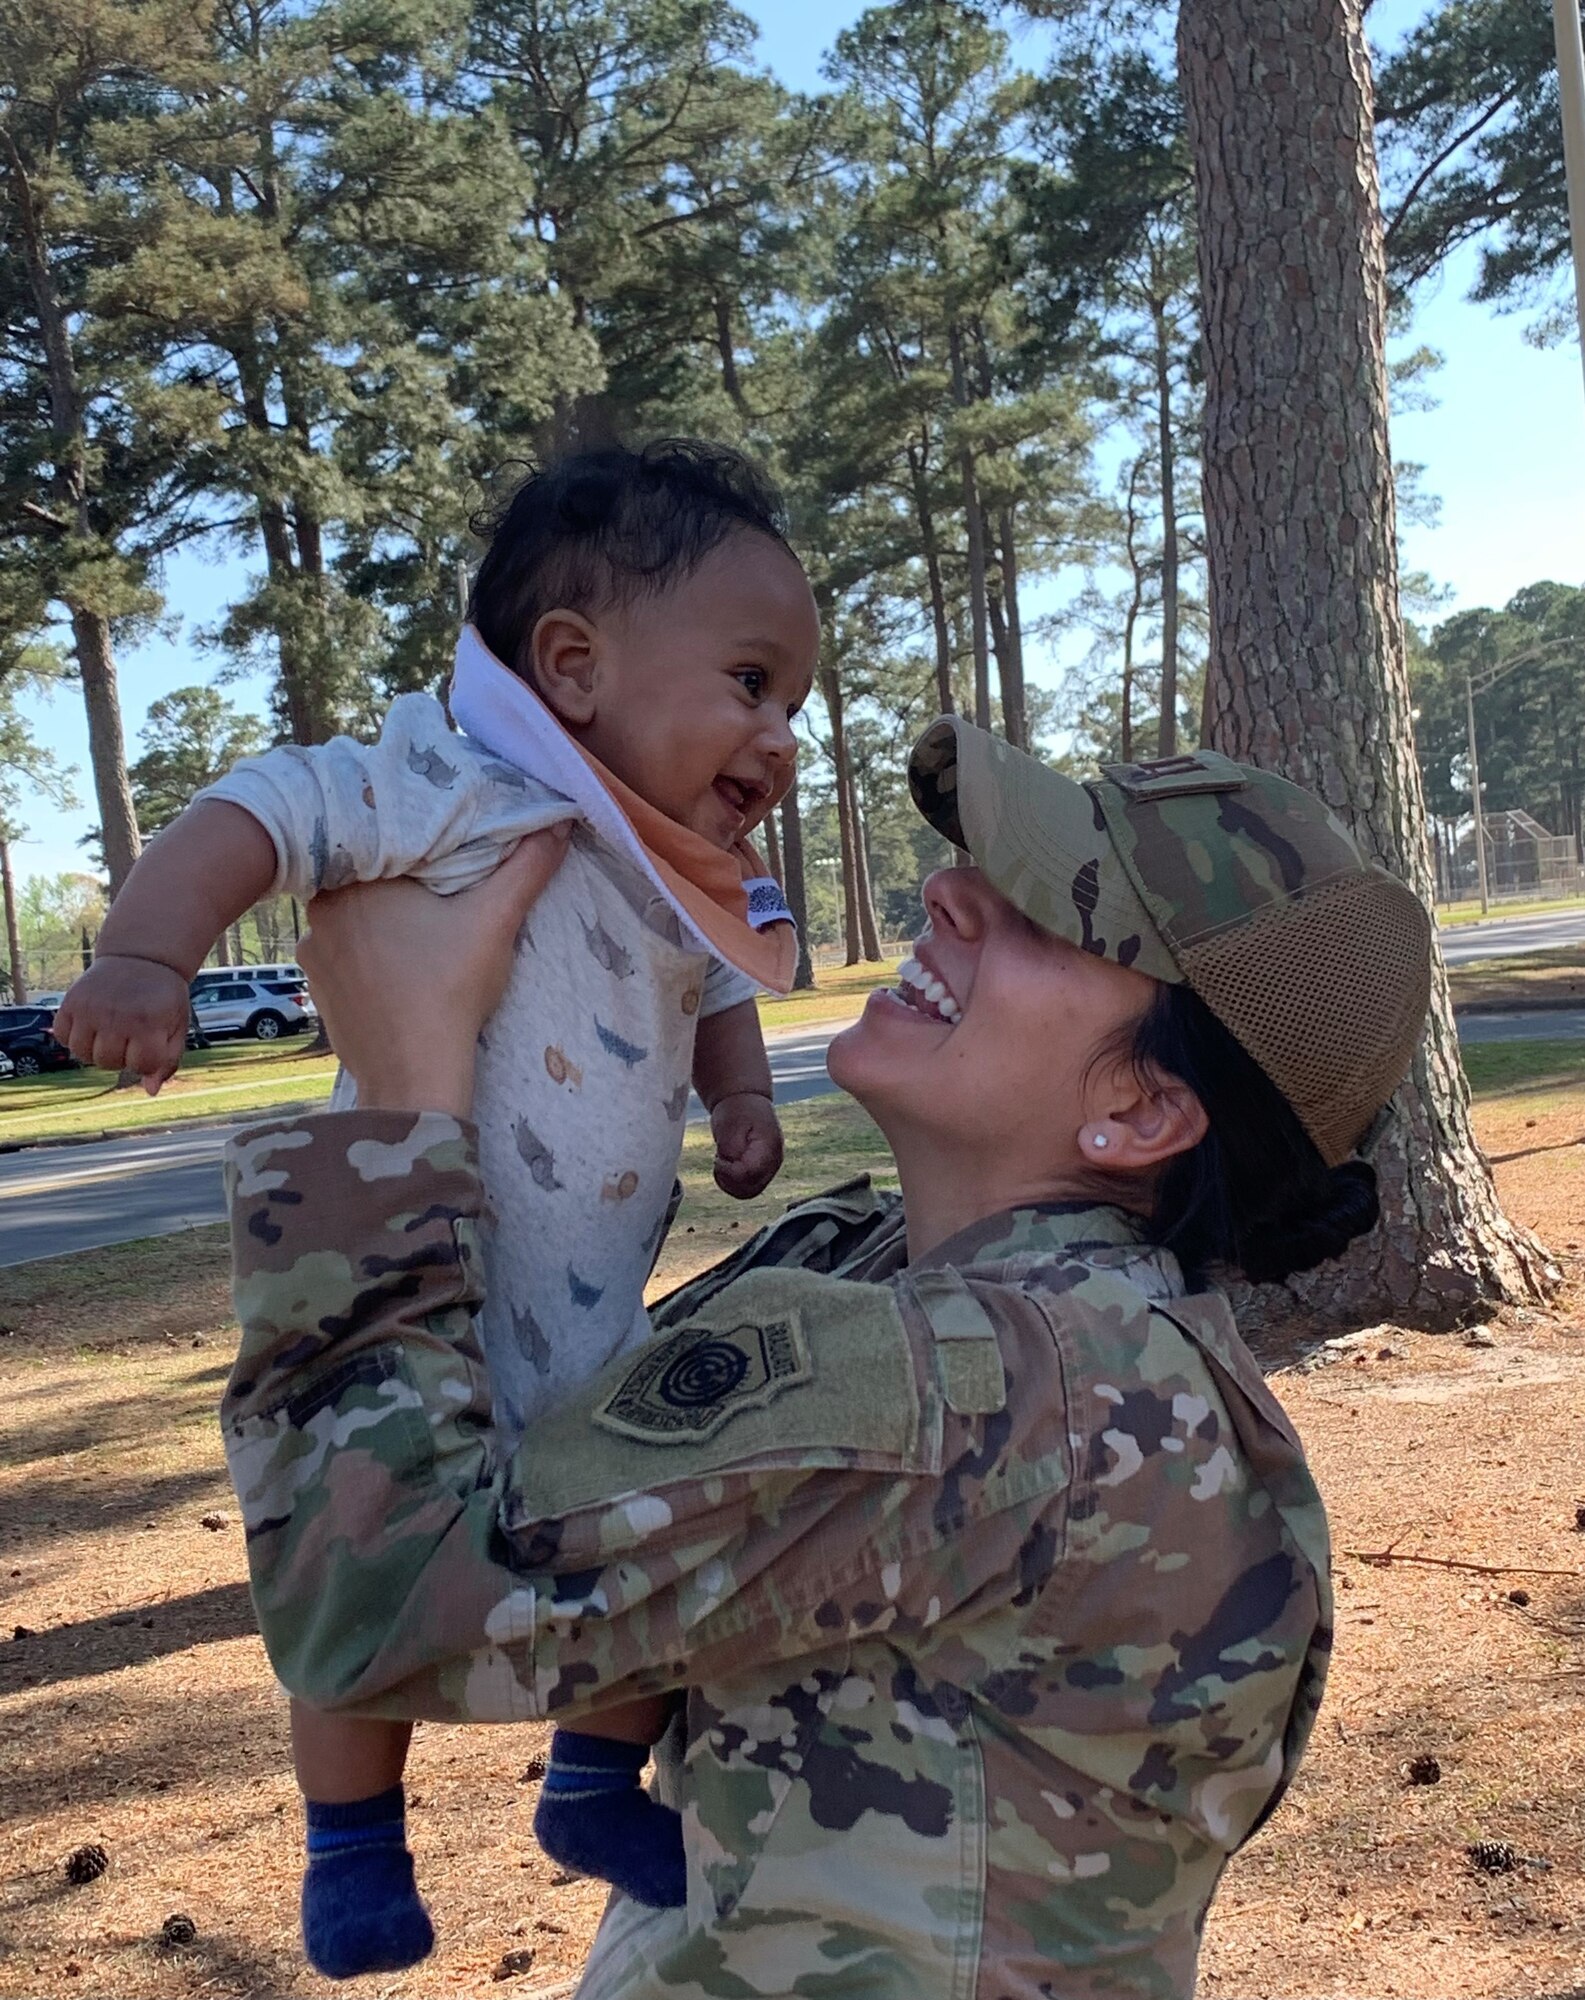 Capt. Stephannie Hernandez Ruberte, 4th Operations Support Squadron intelligence weapons officer, holds her son at Seymour Johnson Air Force Base, North Carolina, April 1, 2022.